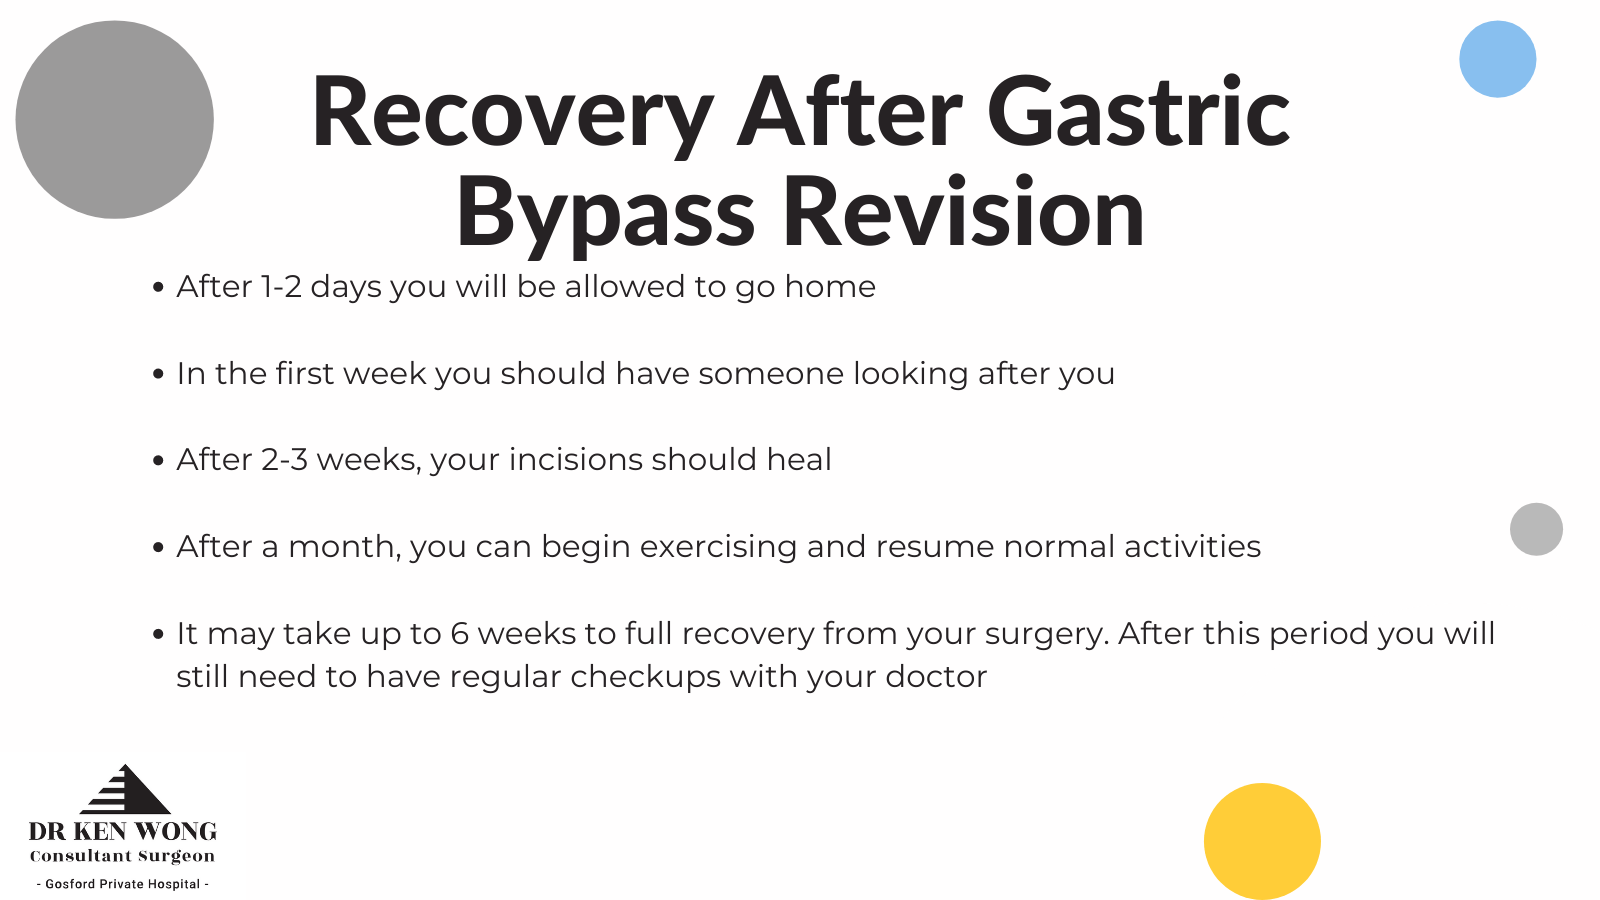 Recovery after gastric bypass